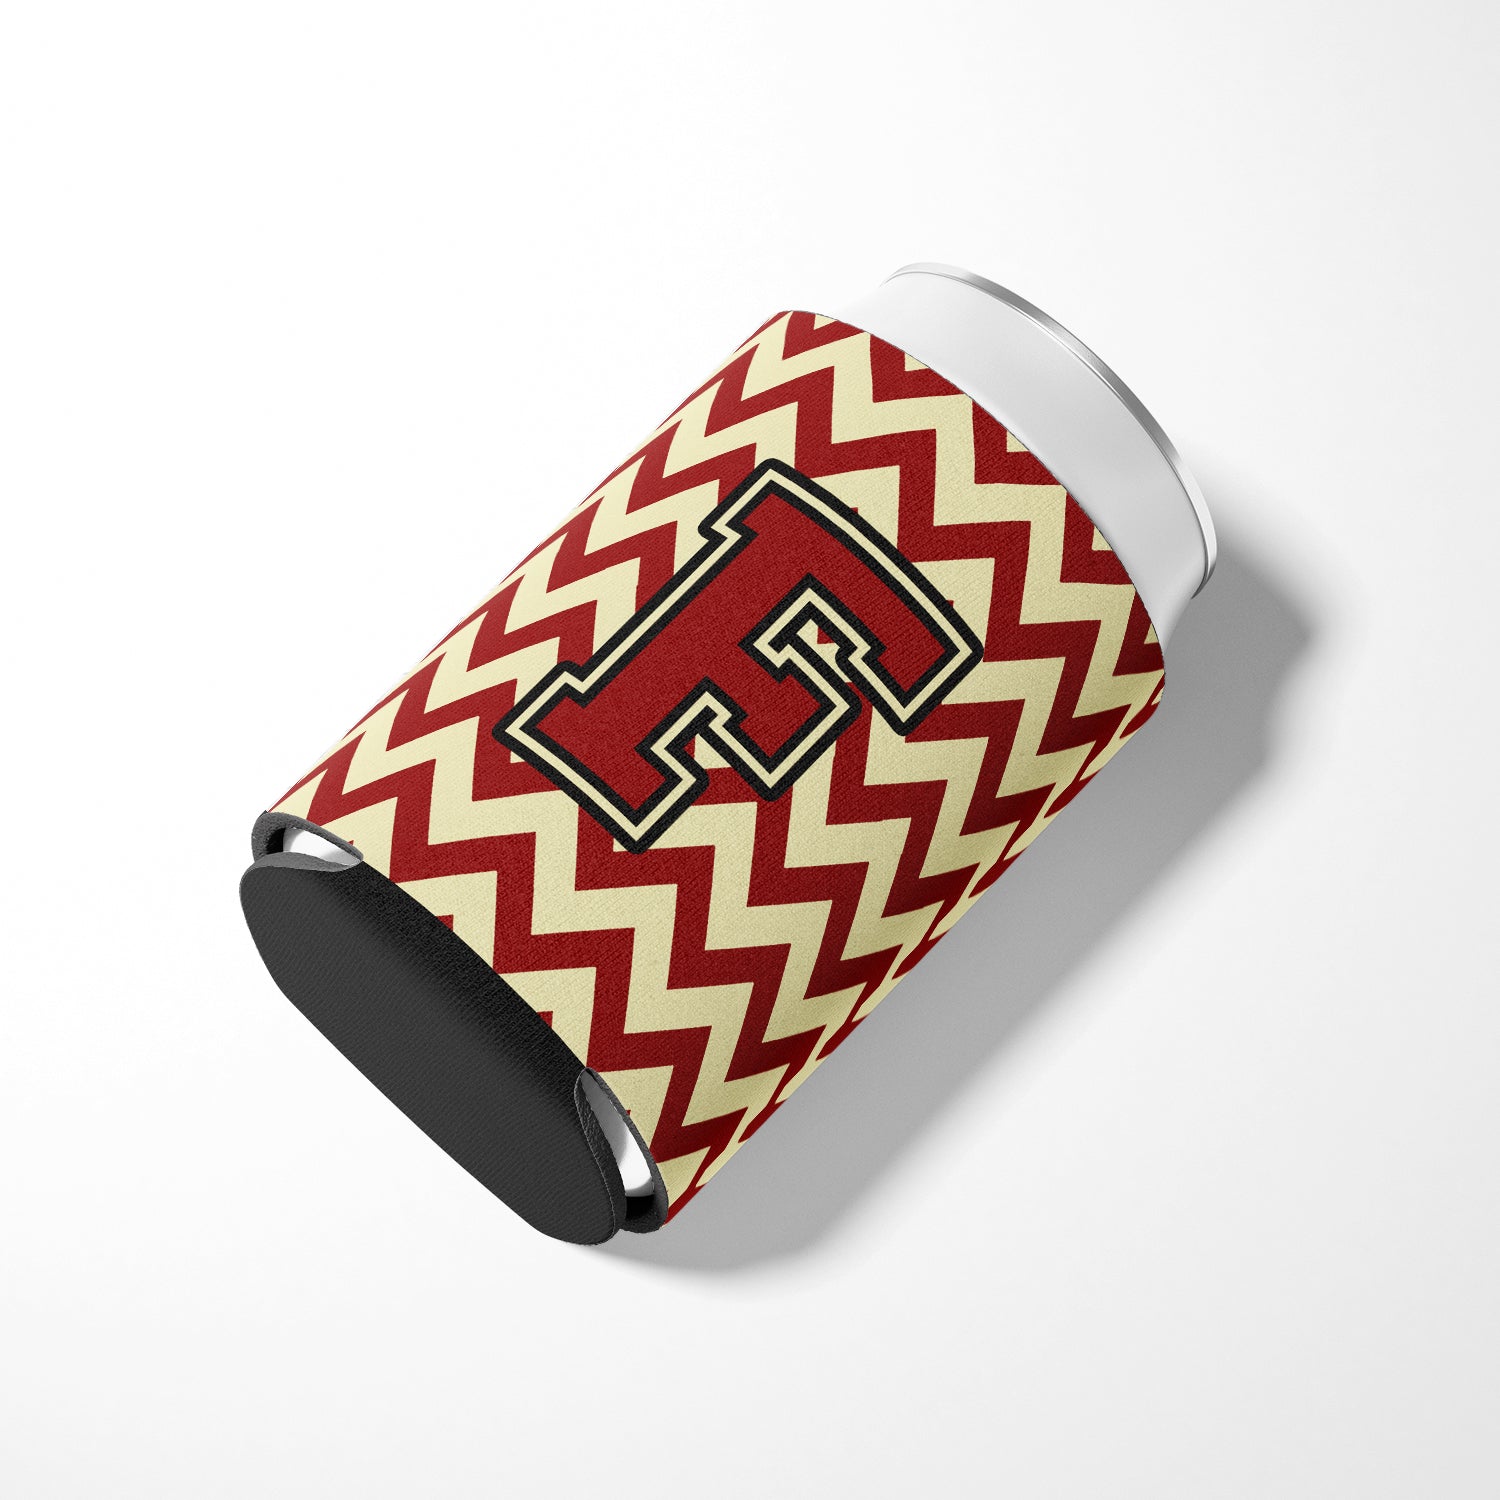 Letter F Chevron Maroon and Gold Can or Bottle Hugger CJ1061-FCC.